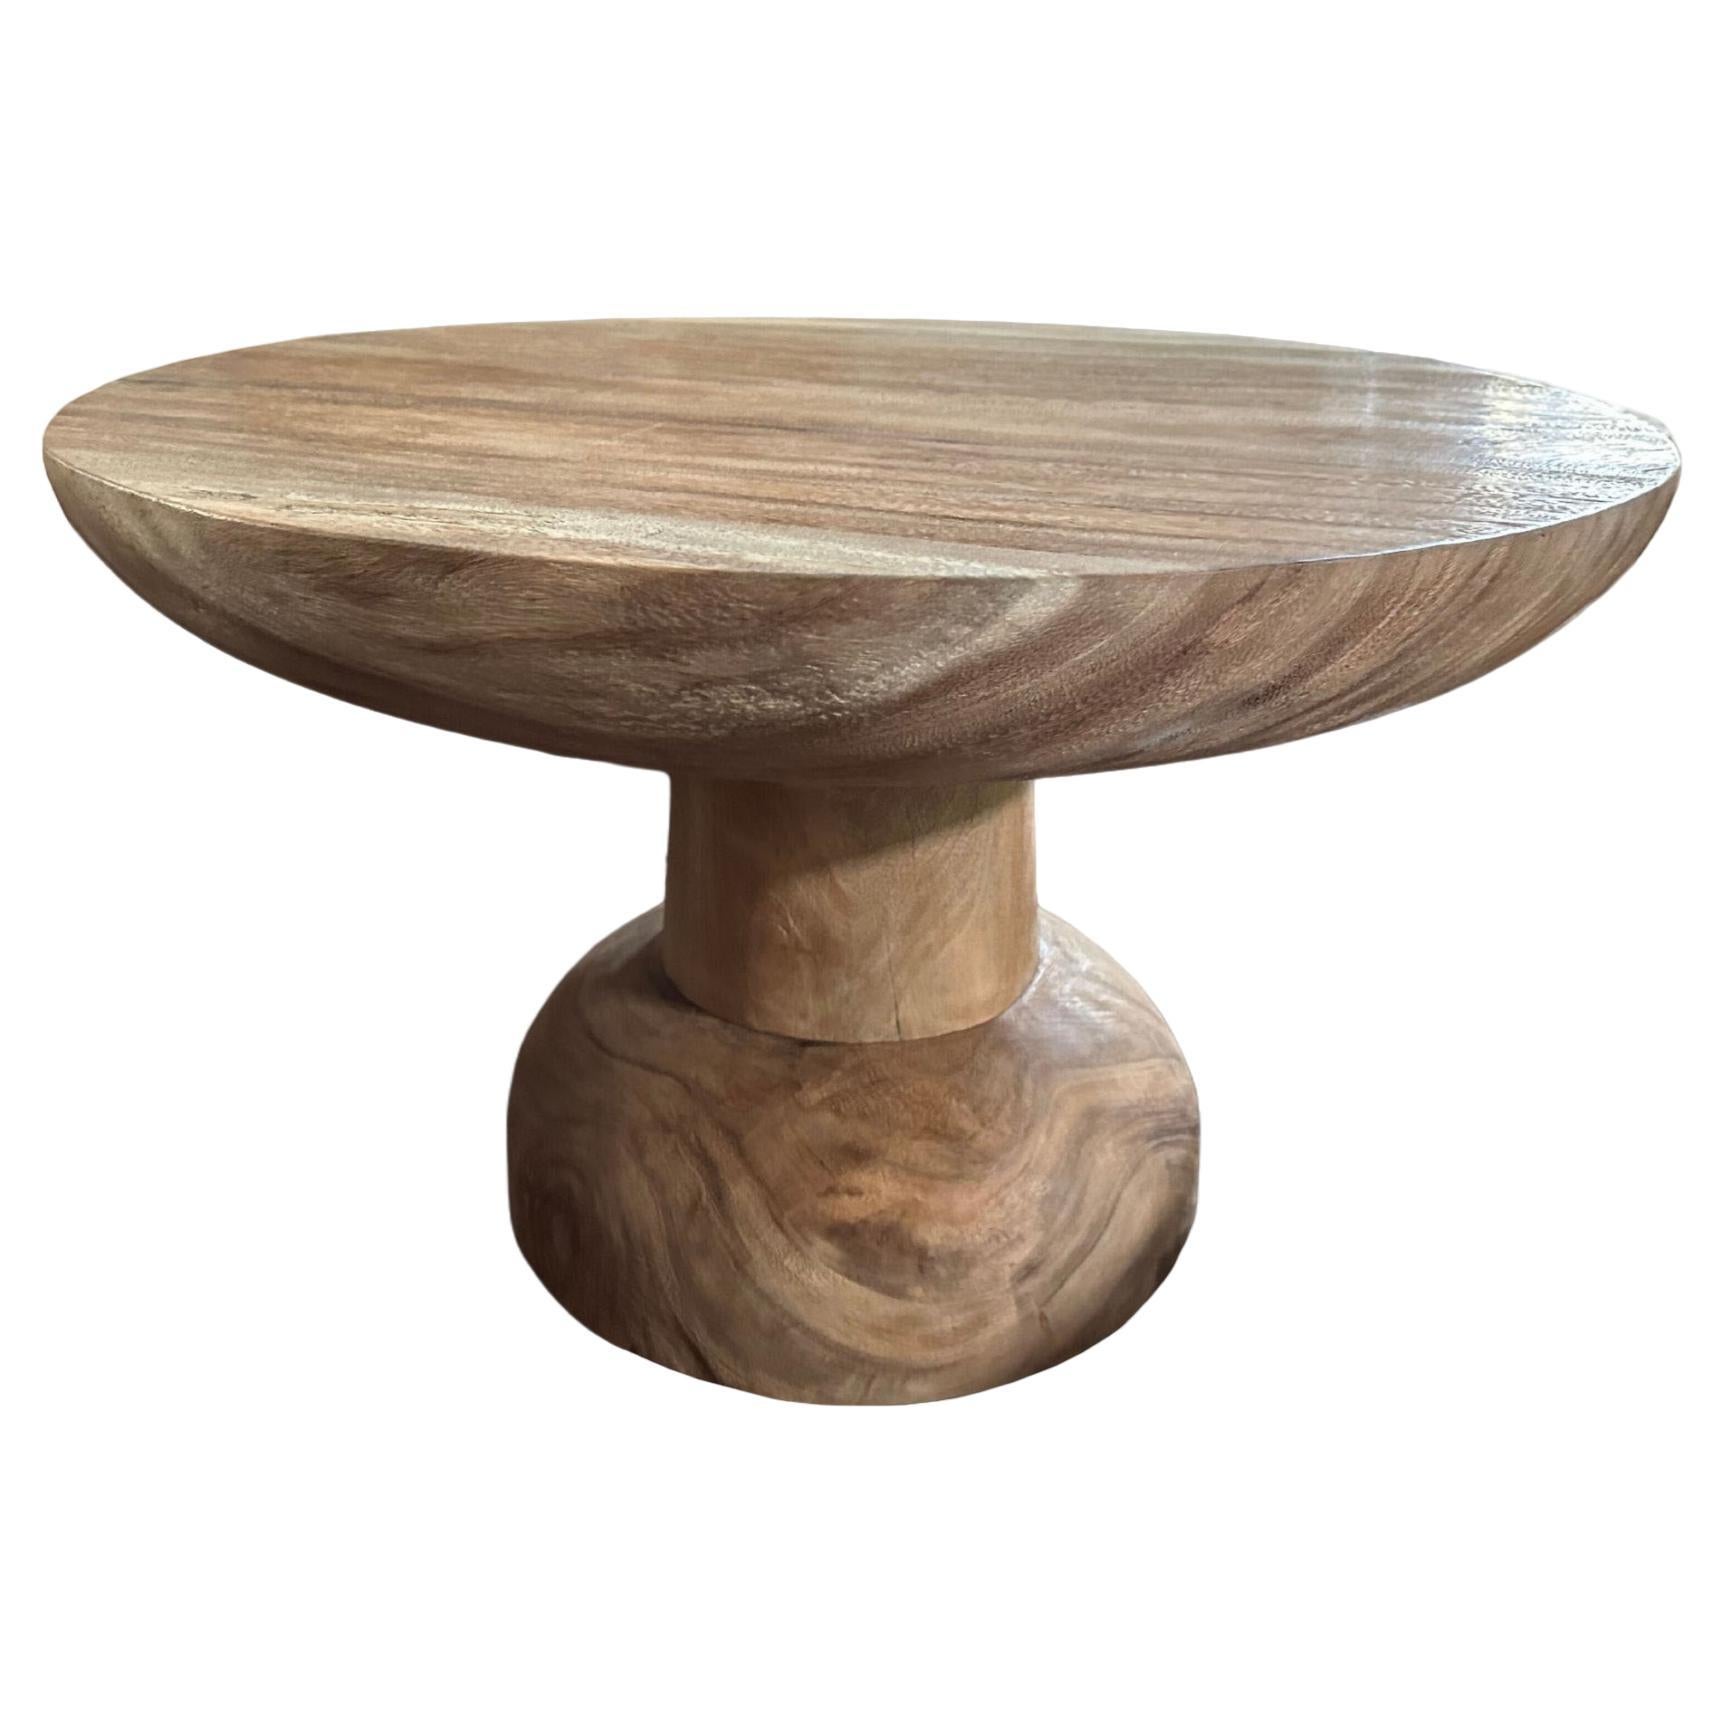 Sculptural Round Table Suar Wood, Modern Organic For Sale